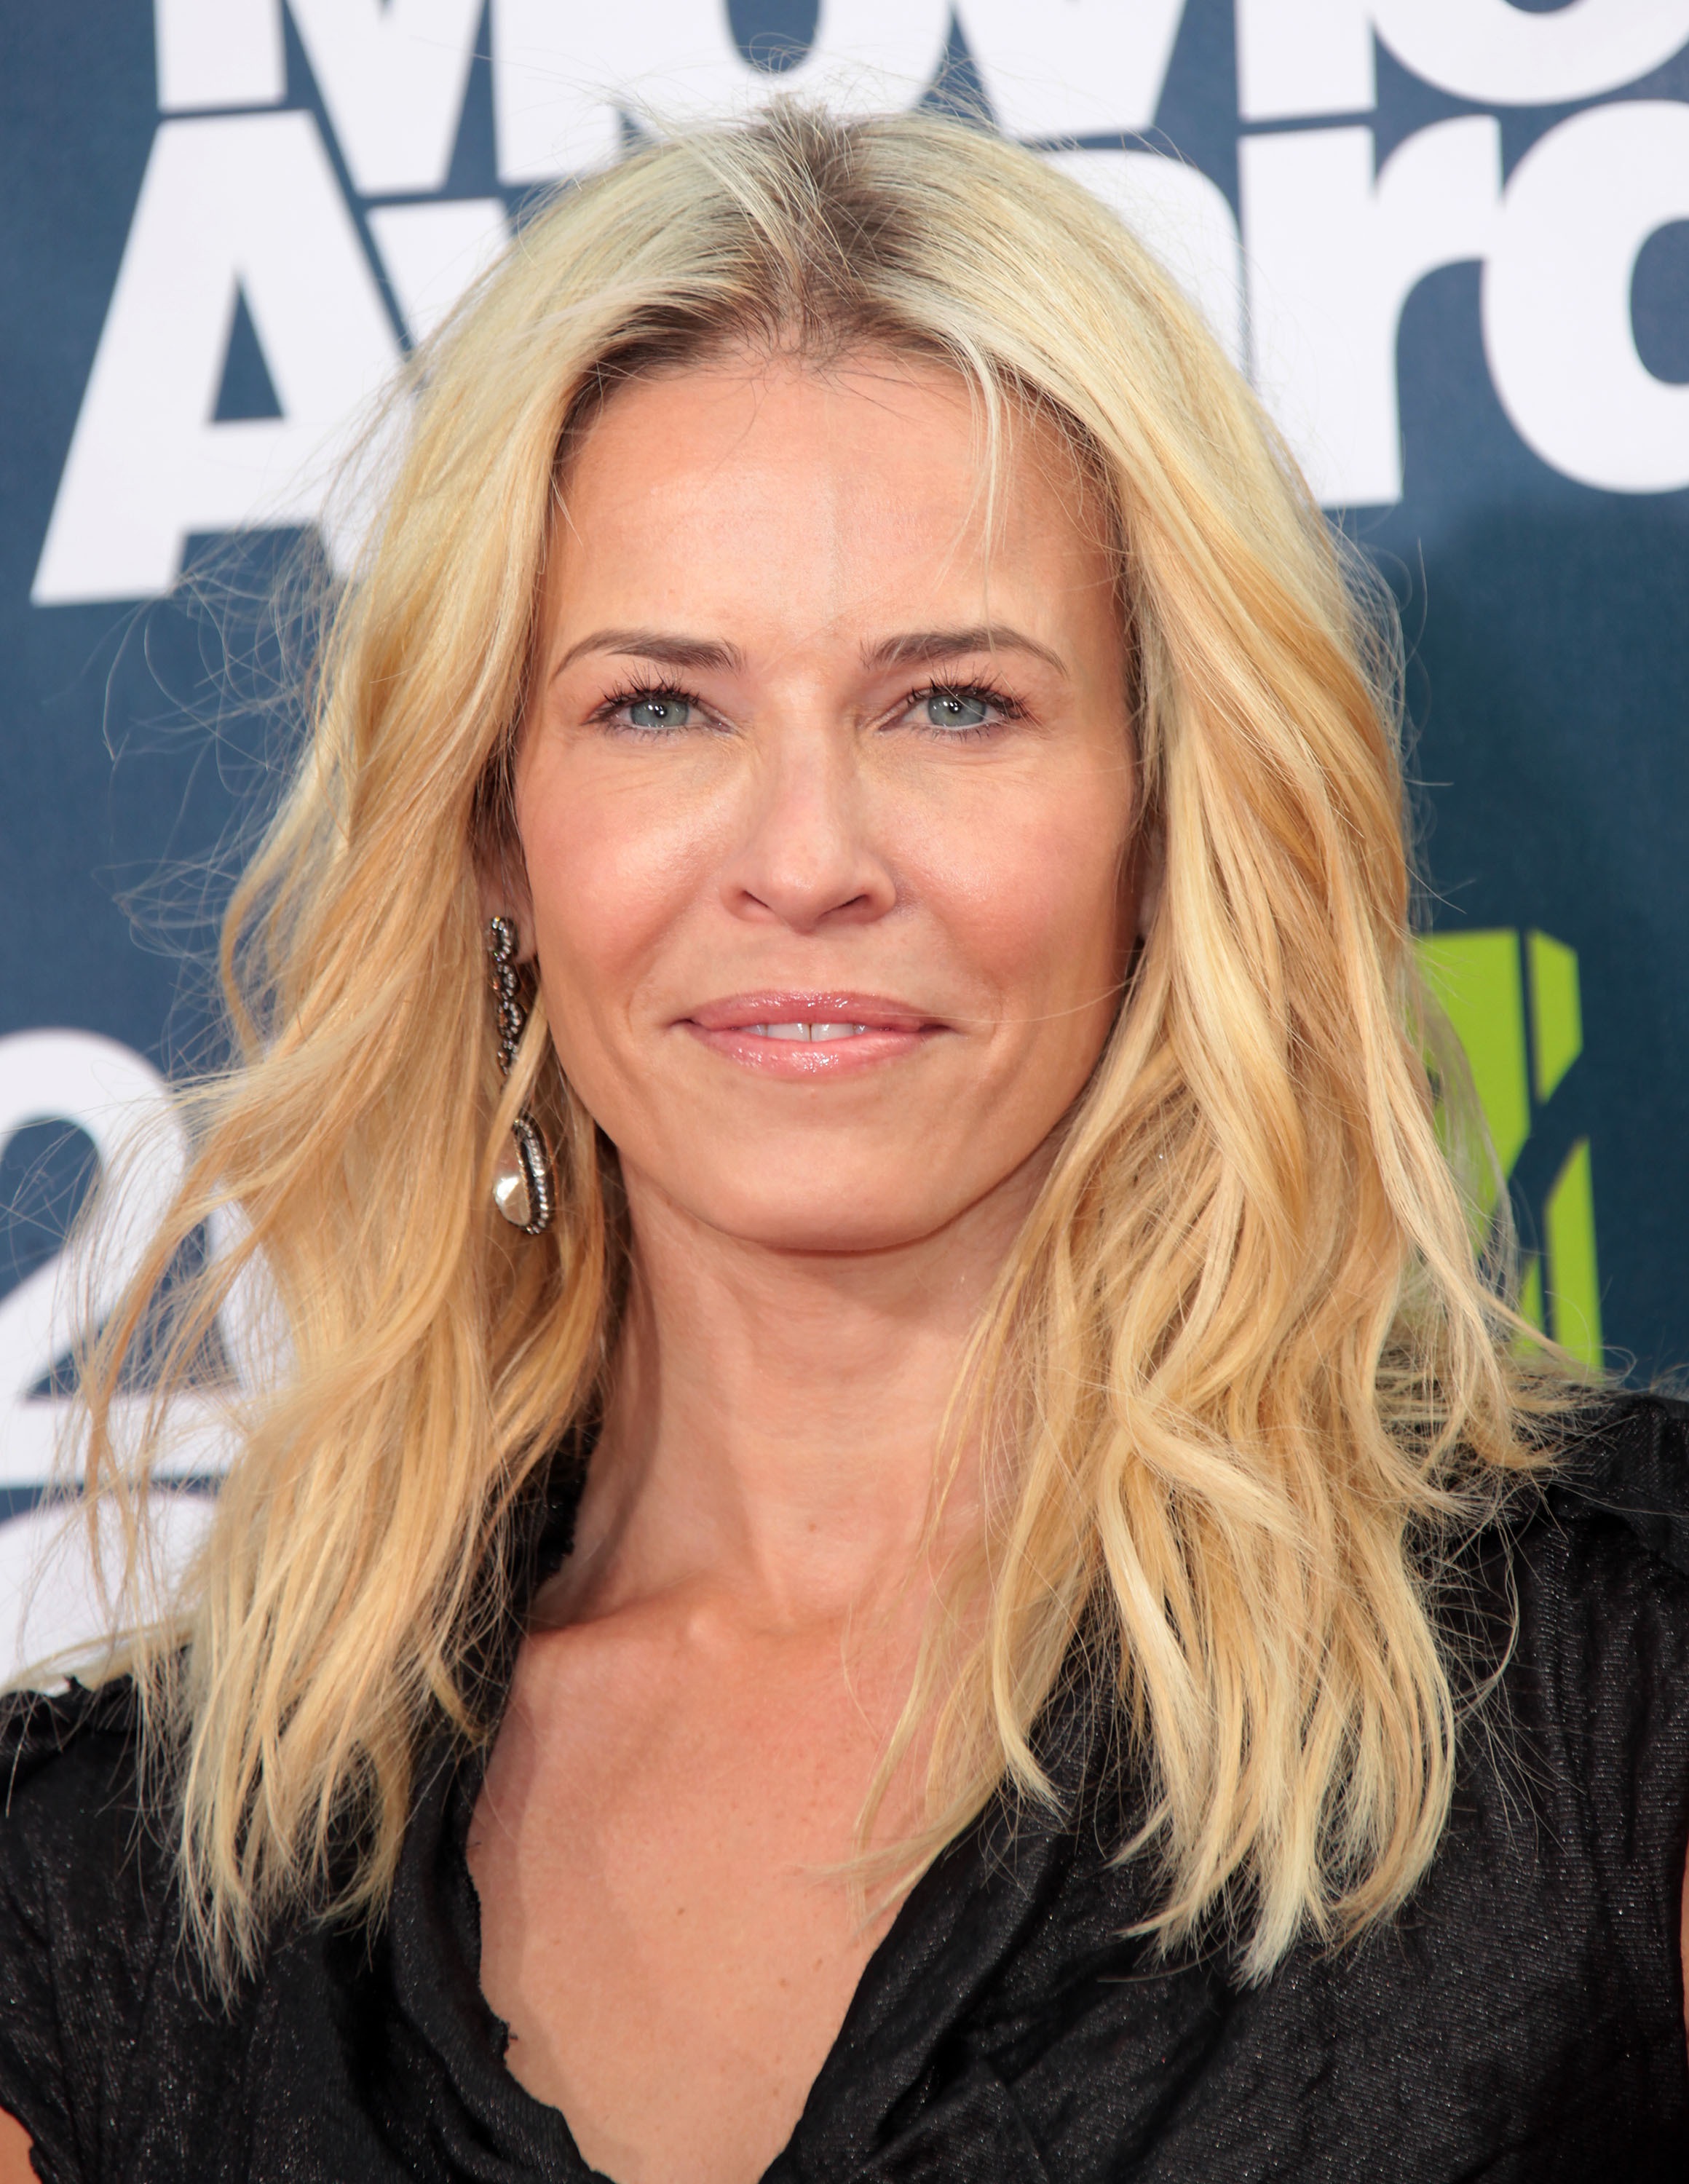 Chelsea Handler on Success 'Scream Until You Get What You Want